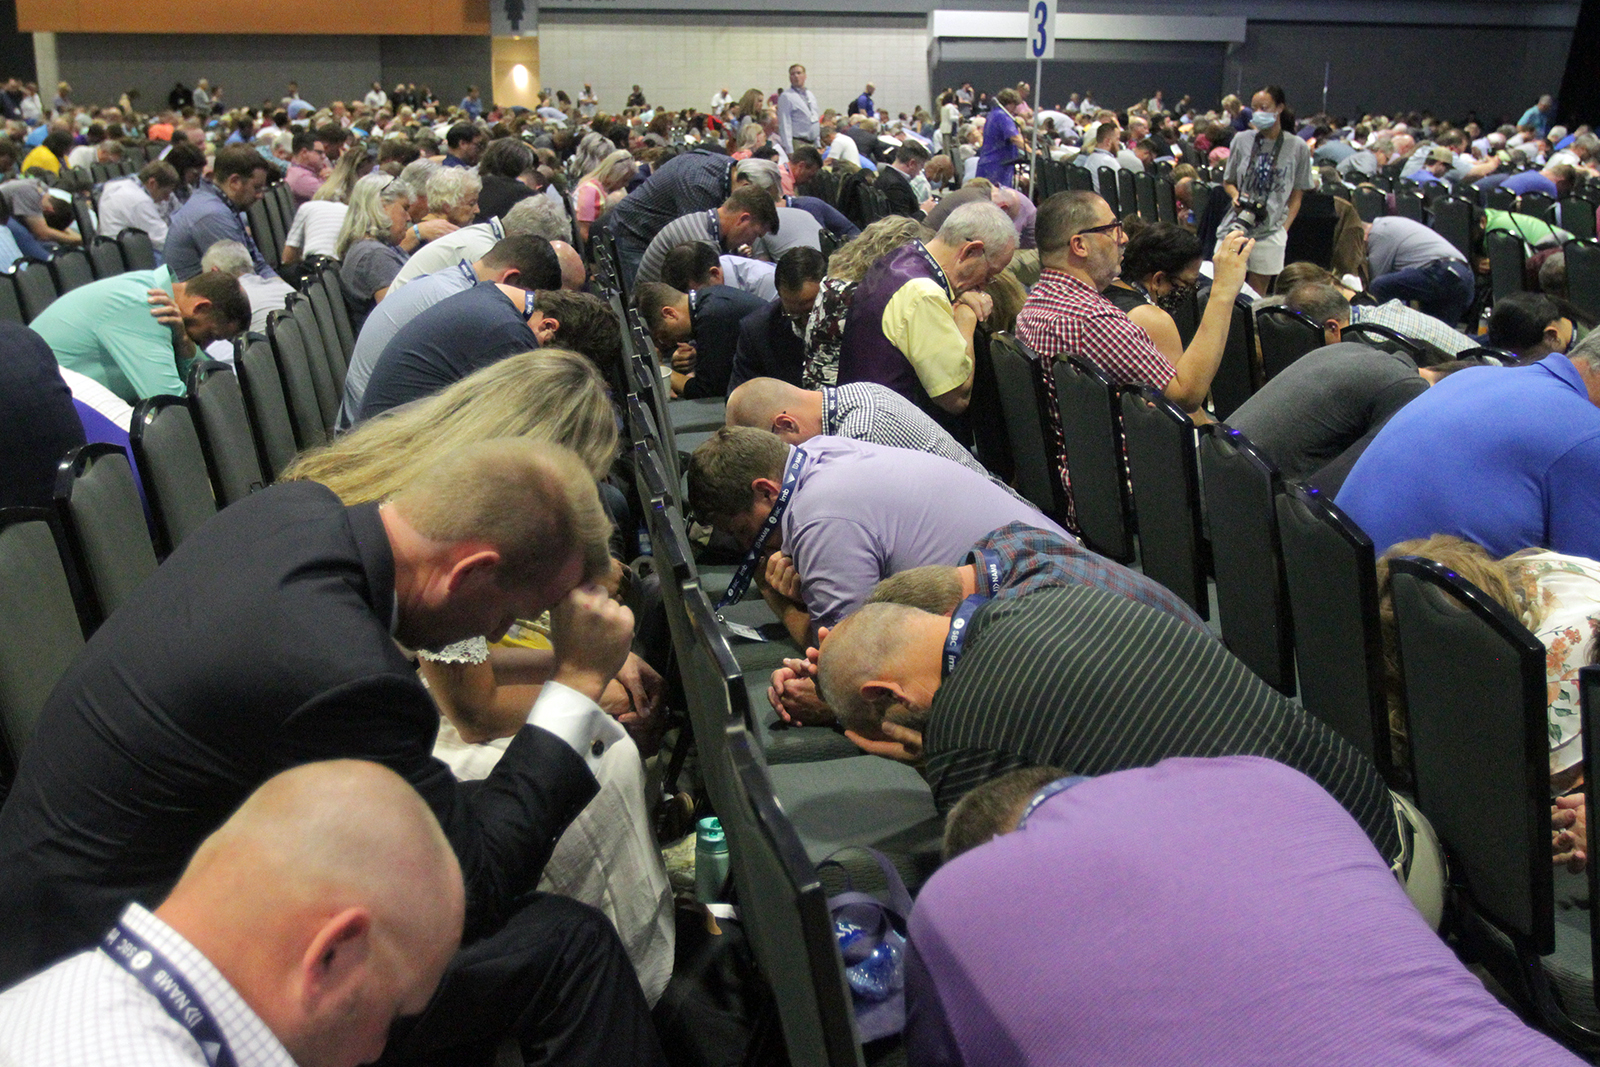 Southern Baptist Convention messengers kneel in prayer during the annual meeting, Tuesday, June 15, 2021, at the Music City Center in Nashville. RNS photo by Kit Doyle